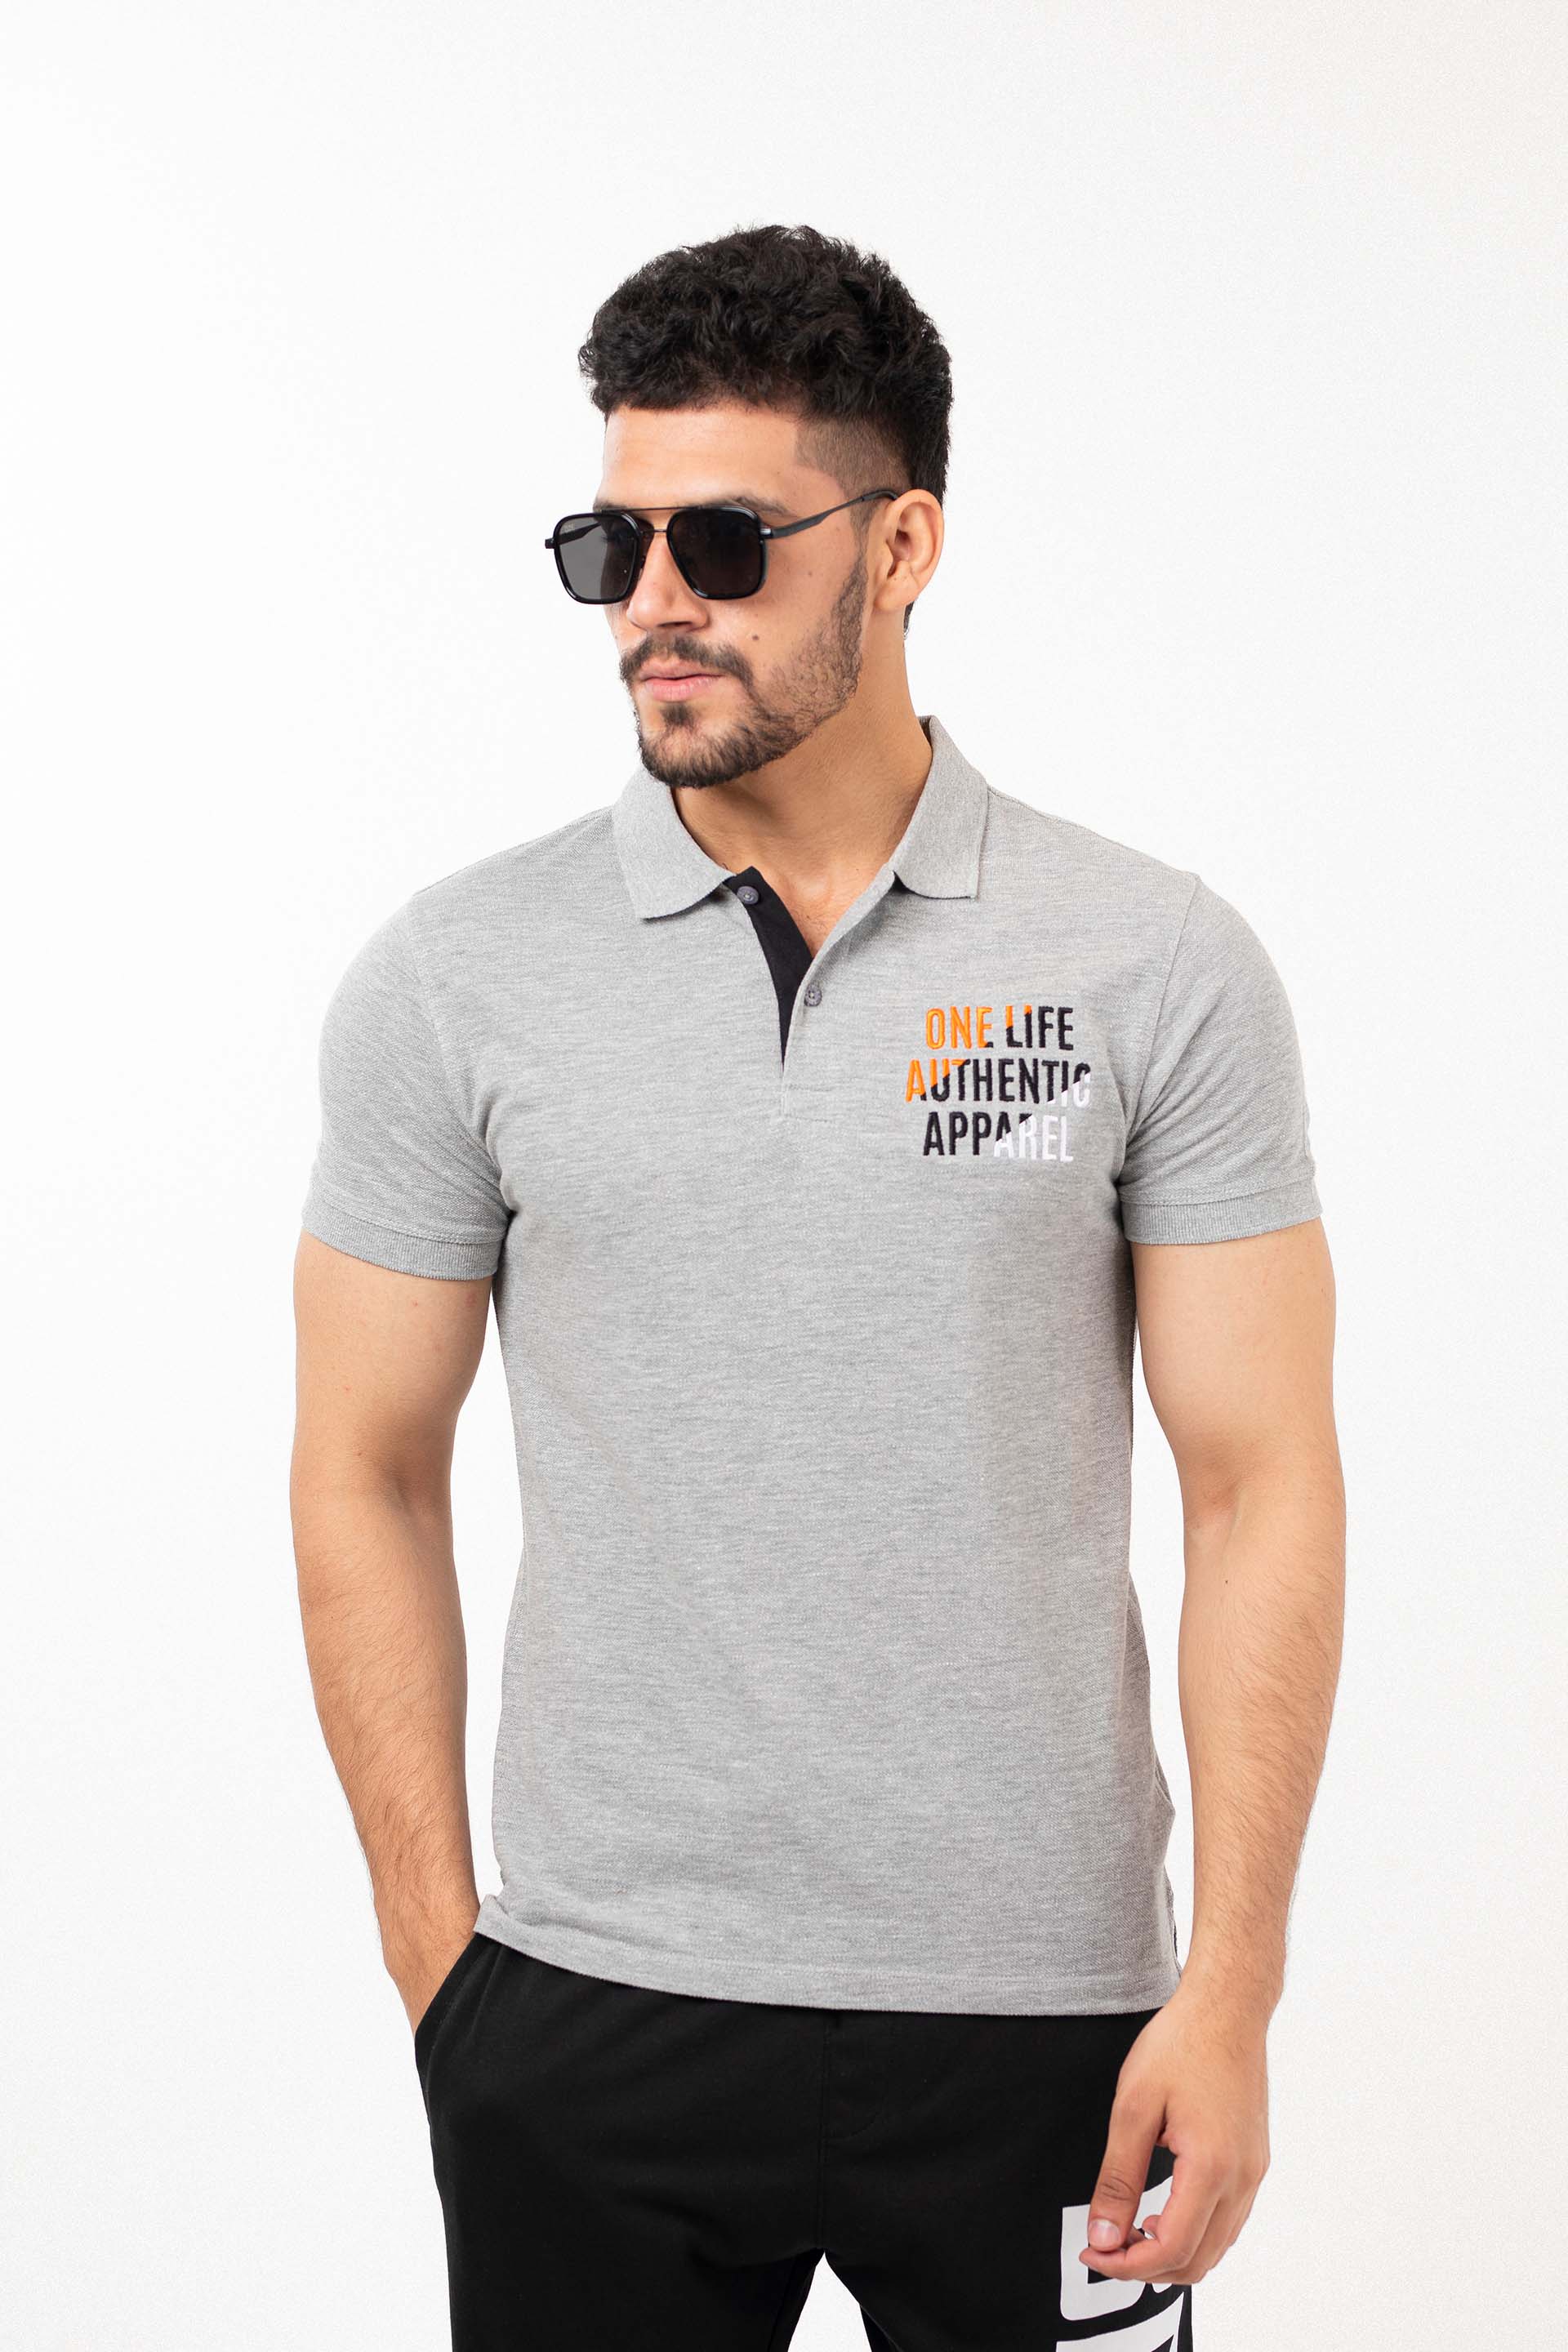 Mens Polo shirts online